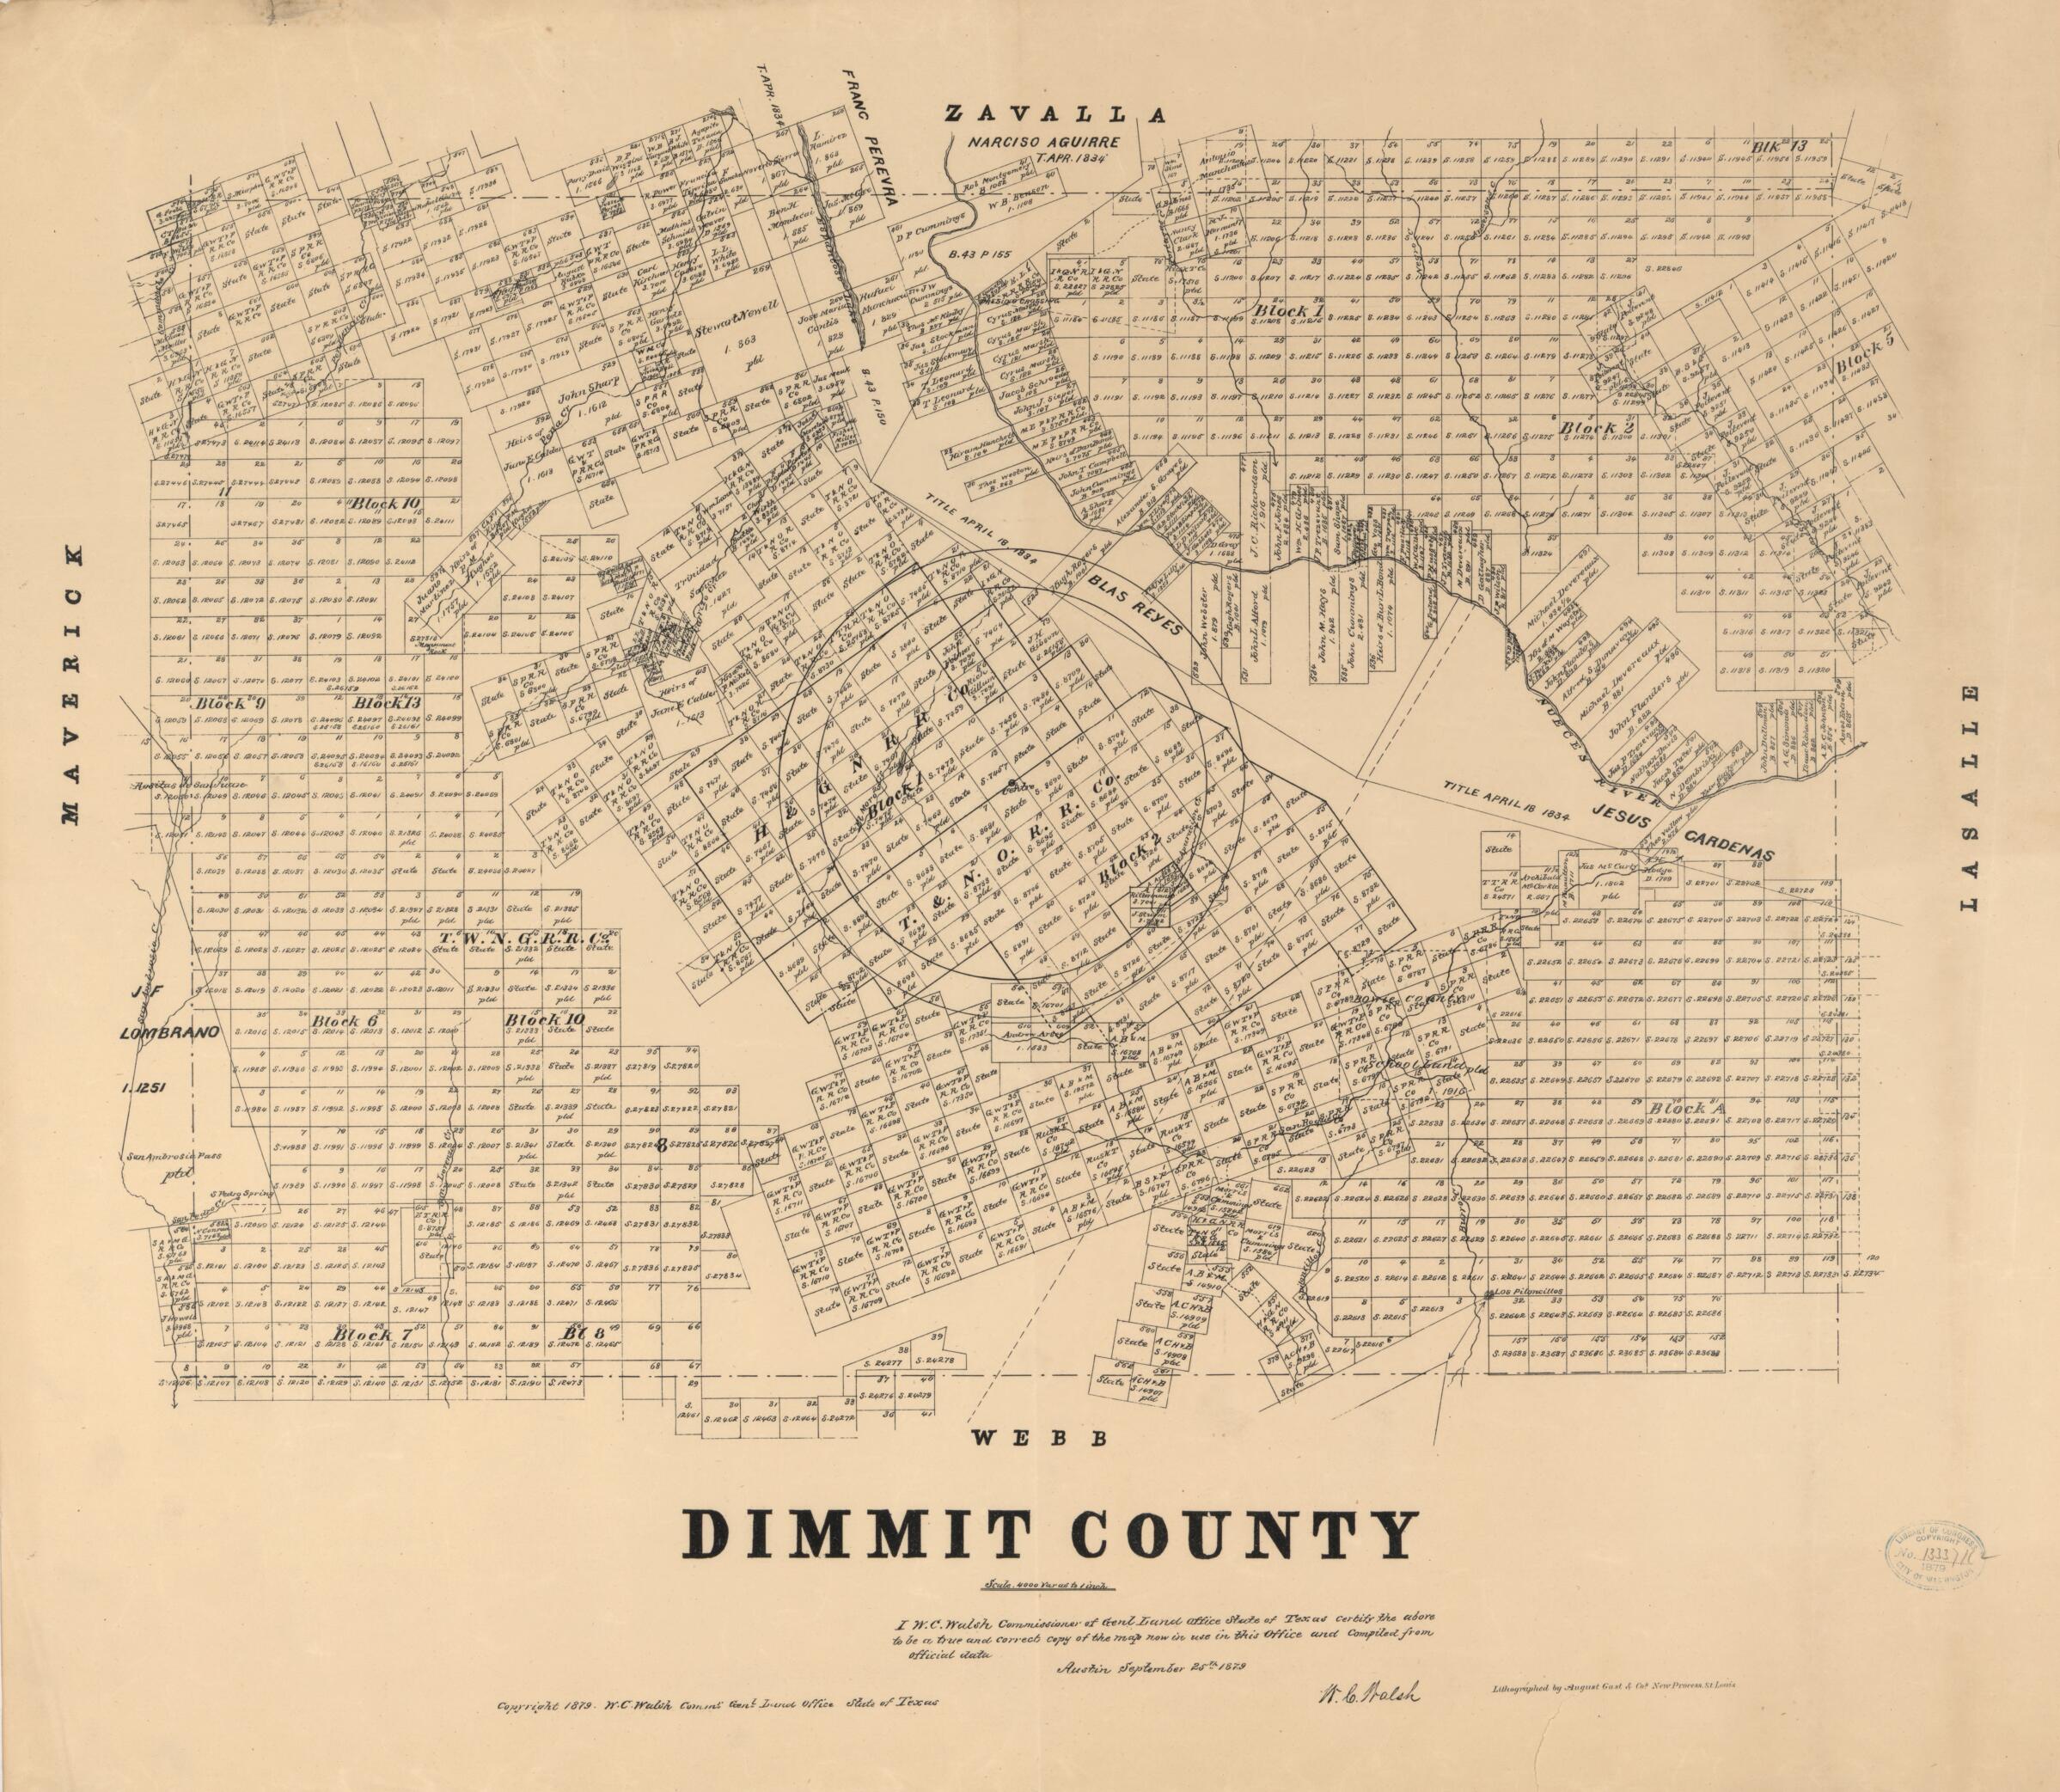 This old map of Dimmit County from 1879 was created by  August Gast &amp; Co,  Texas. General Land Office, W. C. (William C.) Walsh in 1879